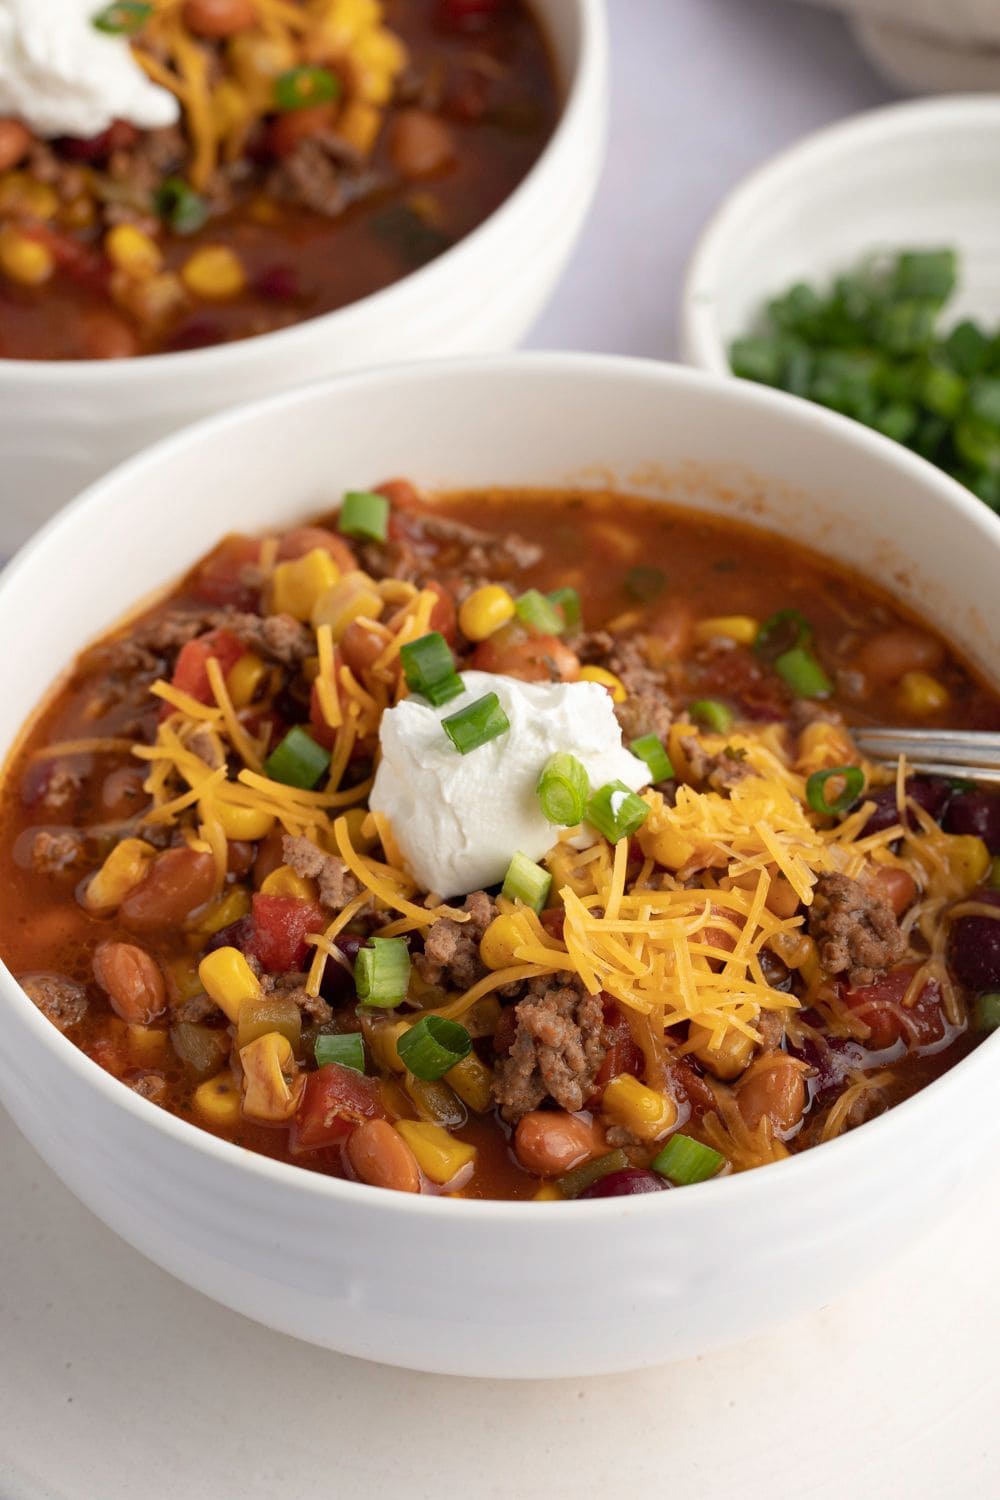 Bowl of Warm Crockpot Taco Soup with Ground Beef and Beans